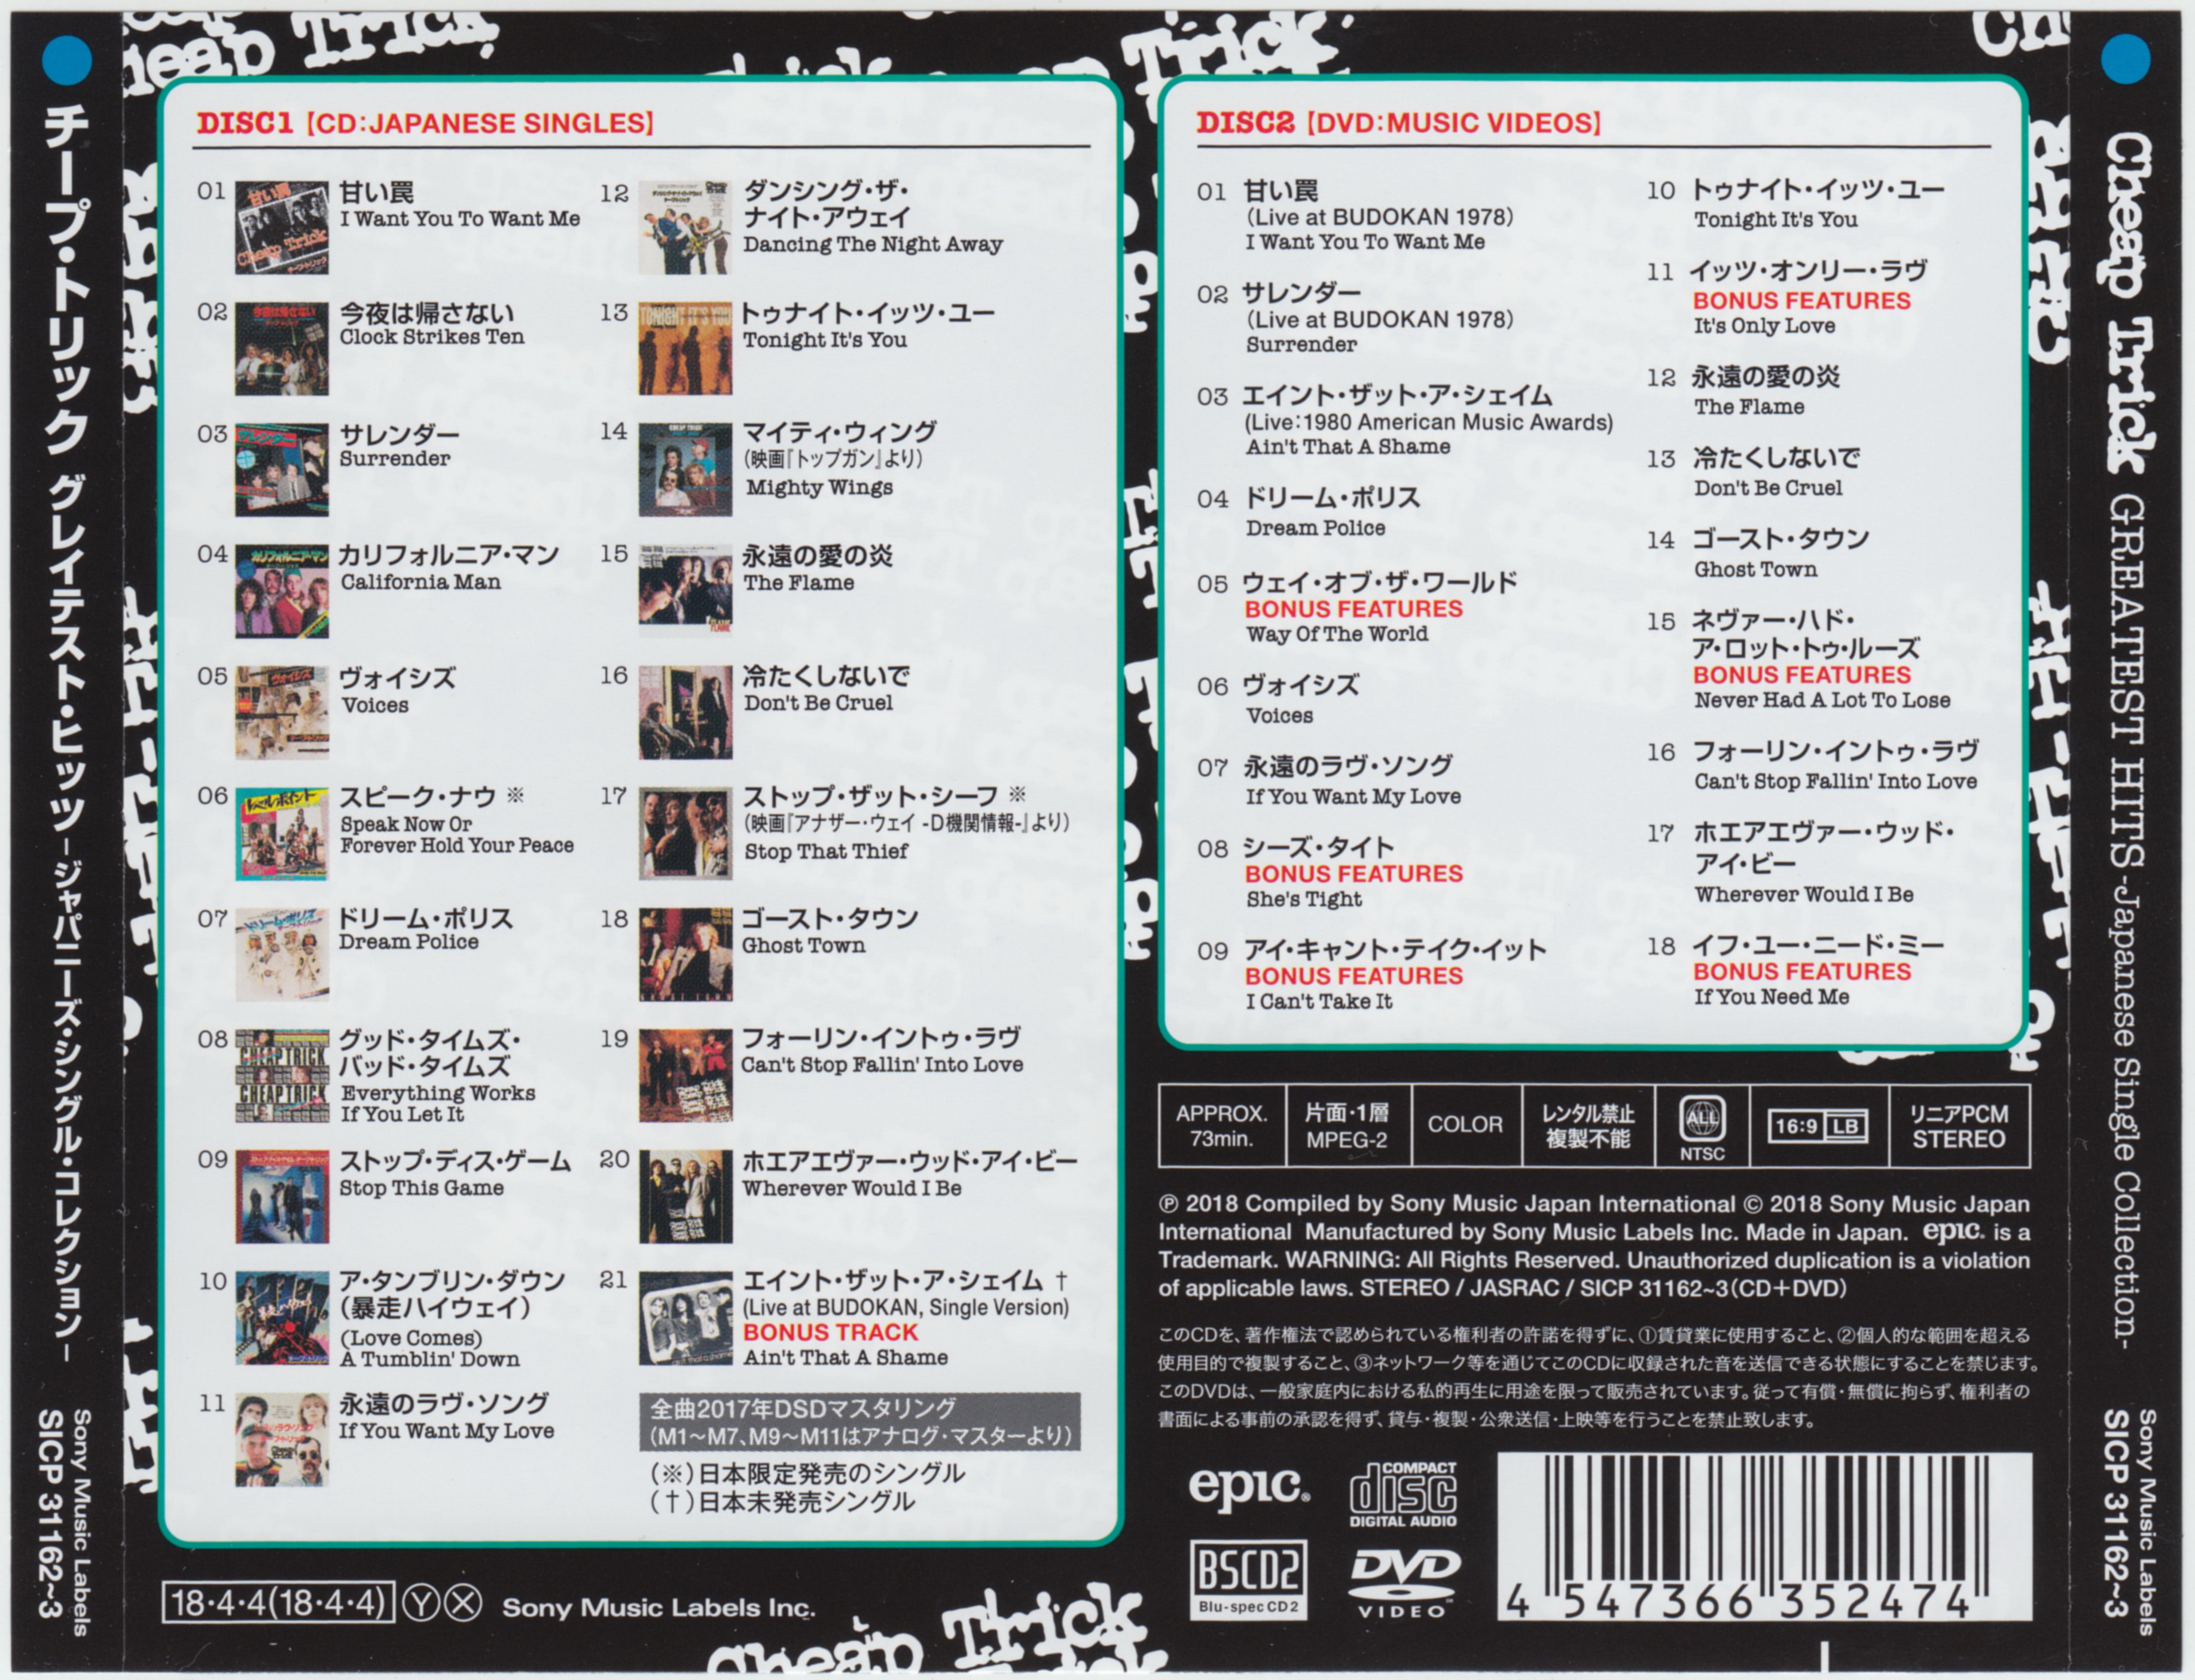 Cheap Trick - Greatest Hits - Japanese Single Collection (2018).jpg